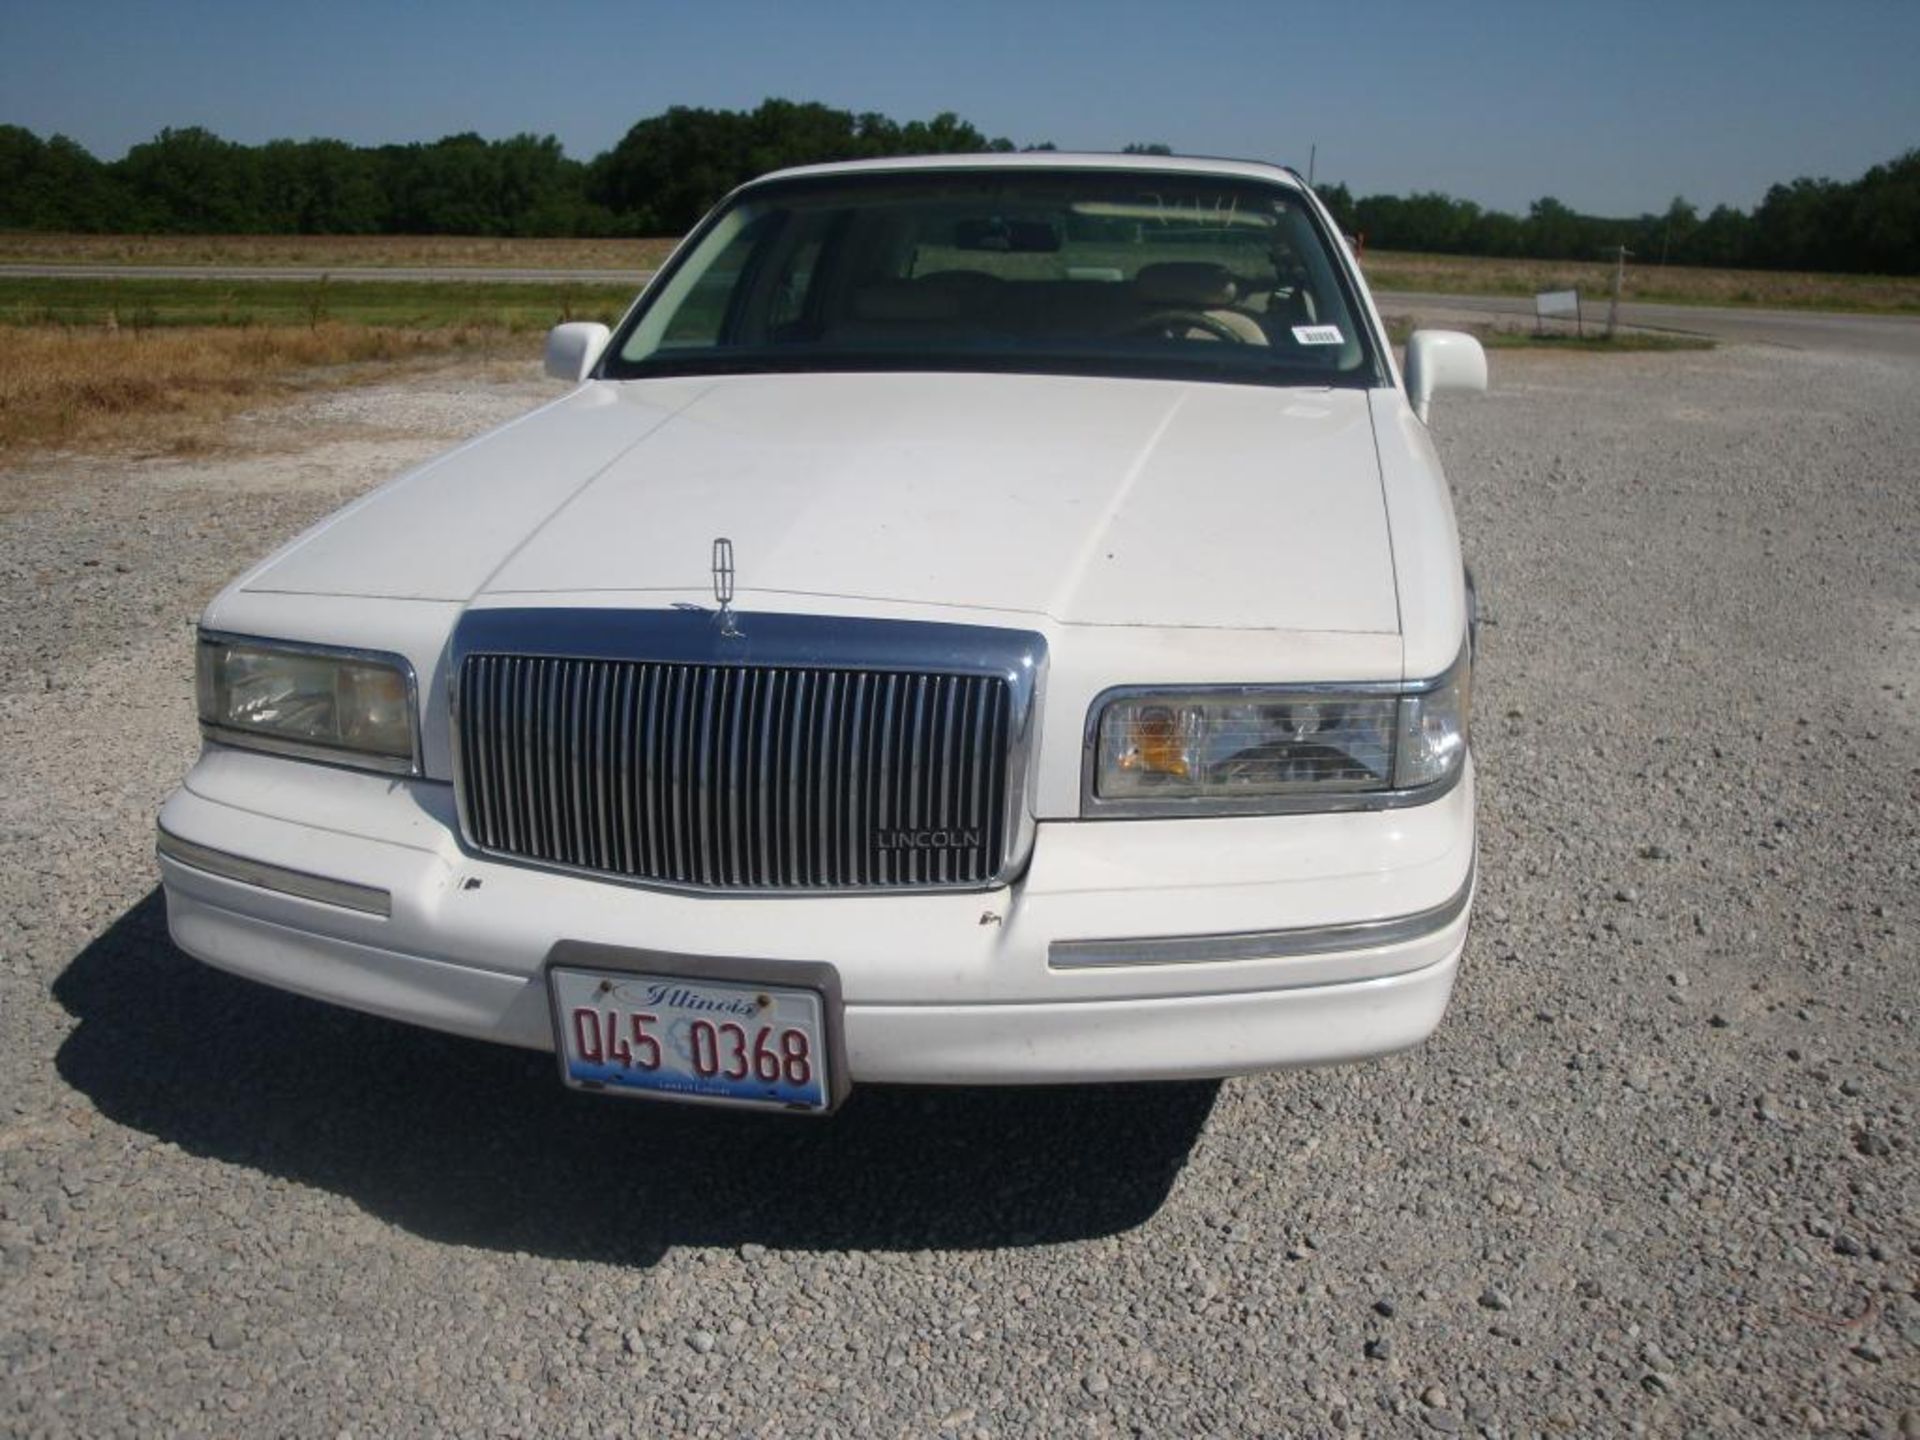 (Title) 1995 Lincoln Towncar,approx. 238,000 miles, Caution-soft brakes, otherwise no issues - Image 3 of 12